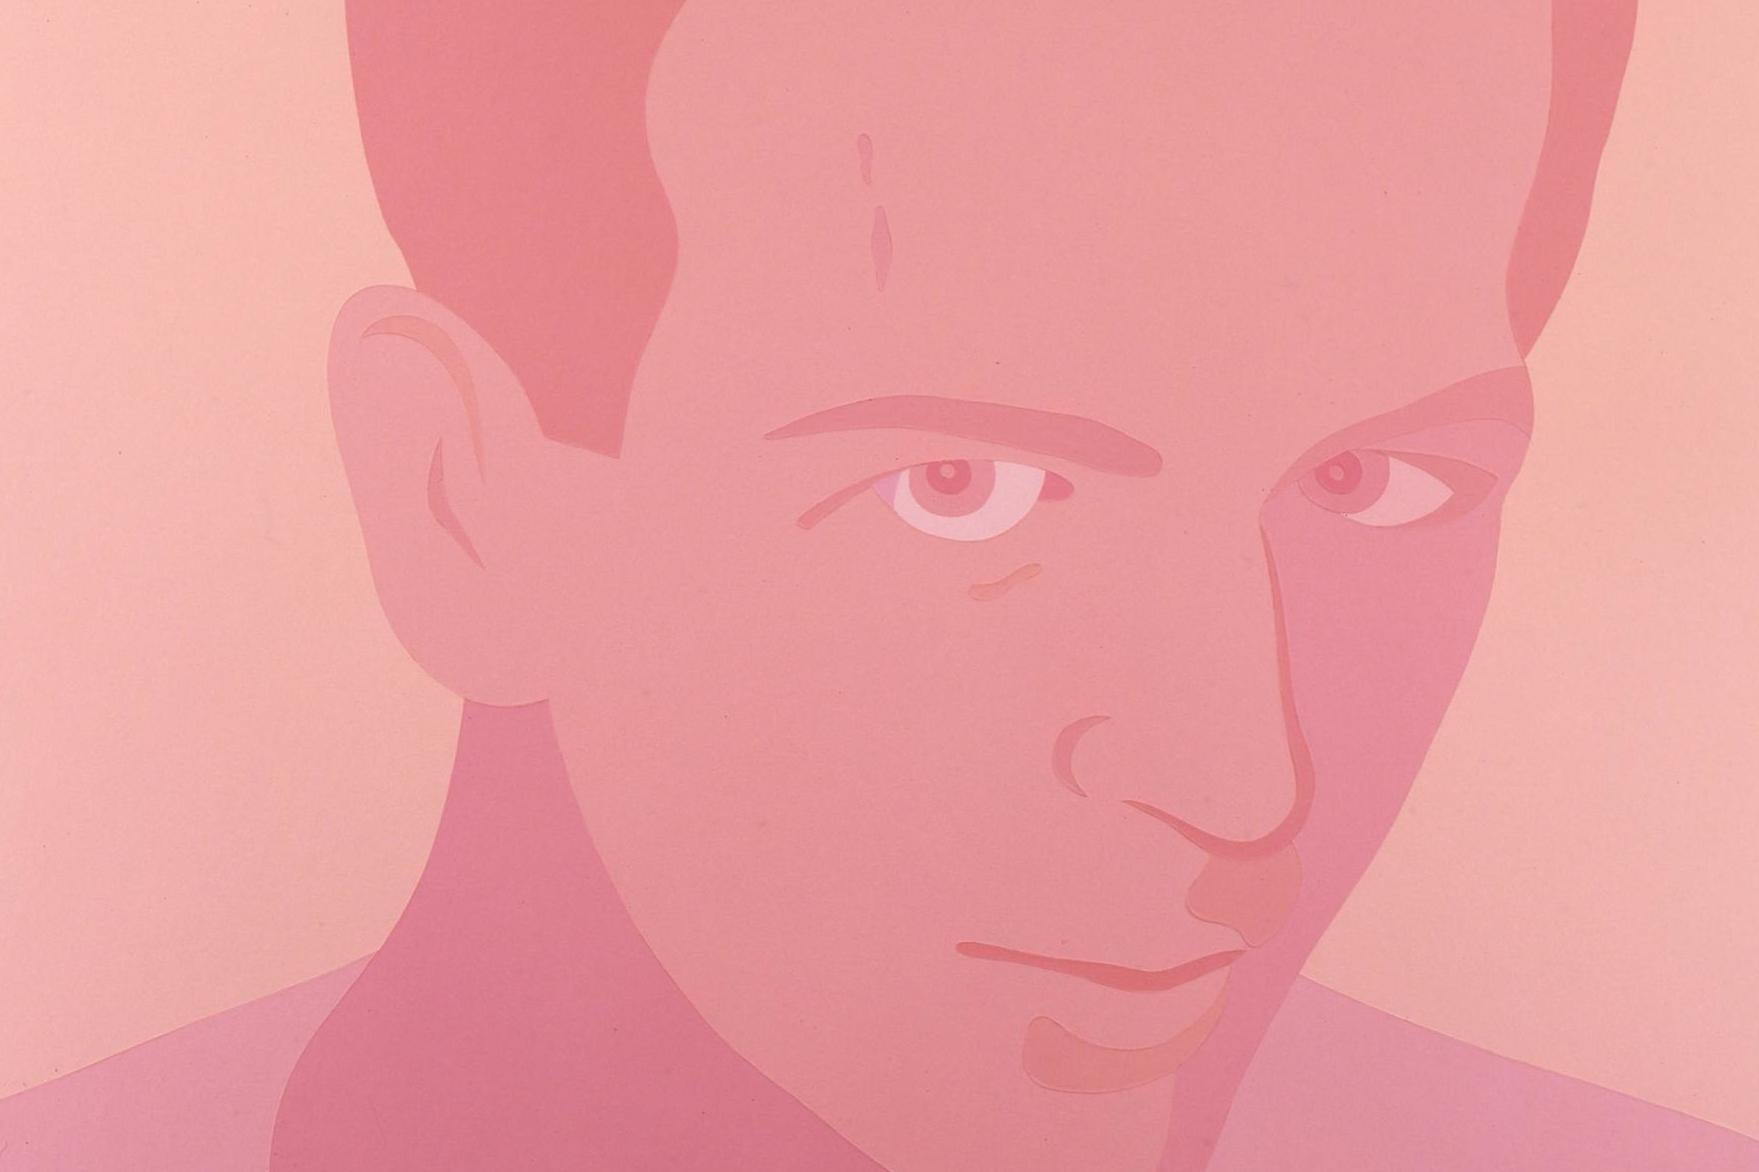 A peachy pink image of Lee Harvey Oswald looms enigmatically over visitors to the Breuer's latest exhibition